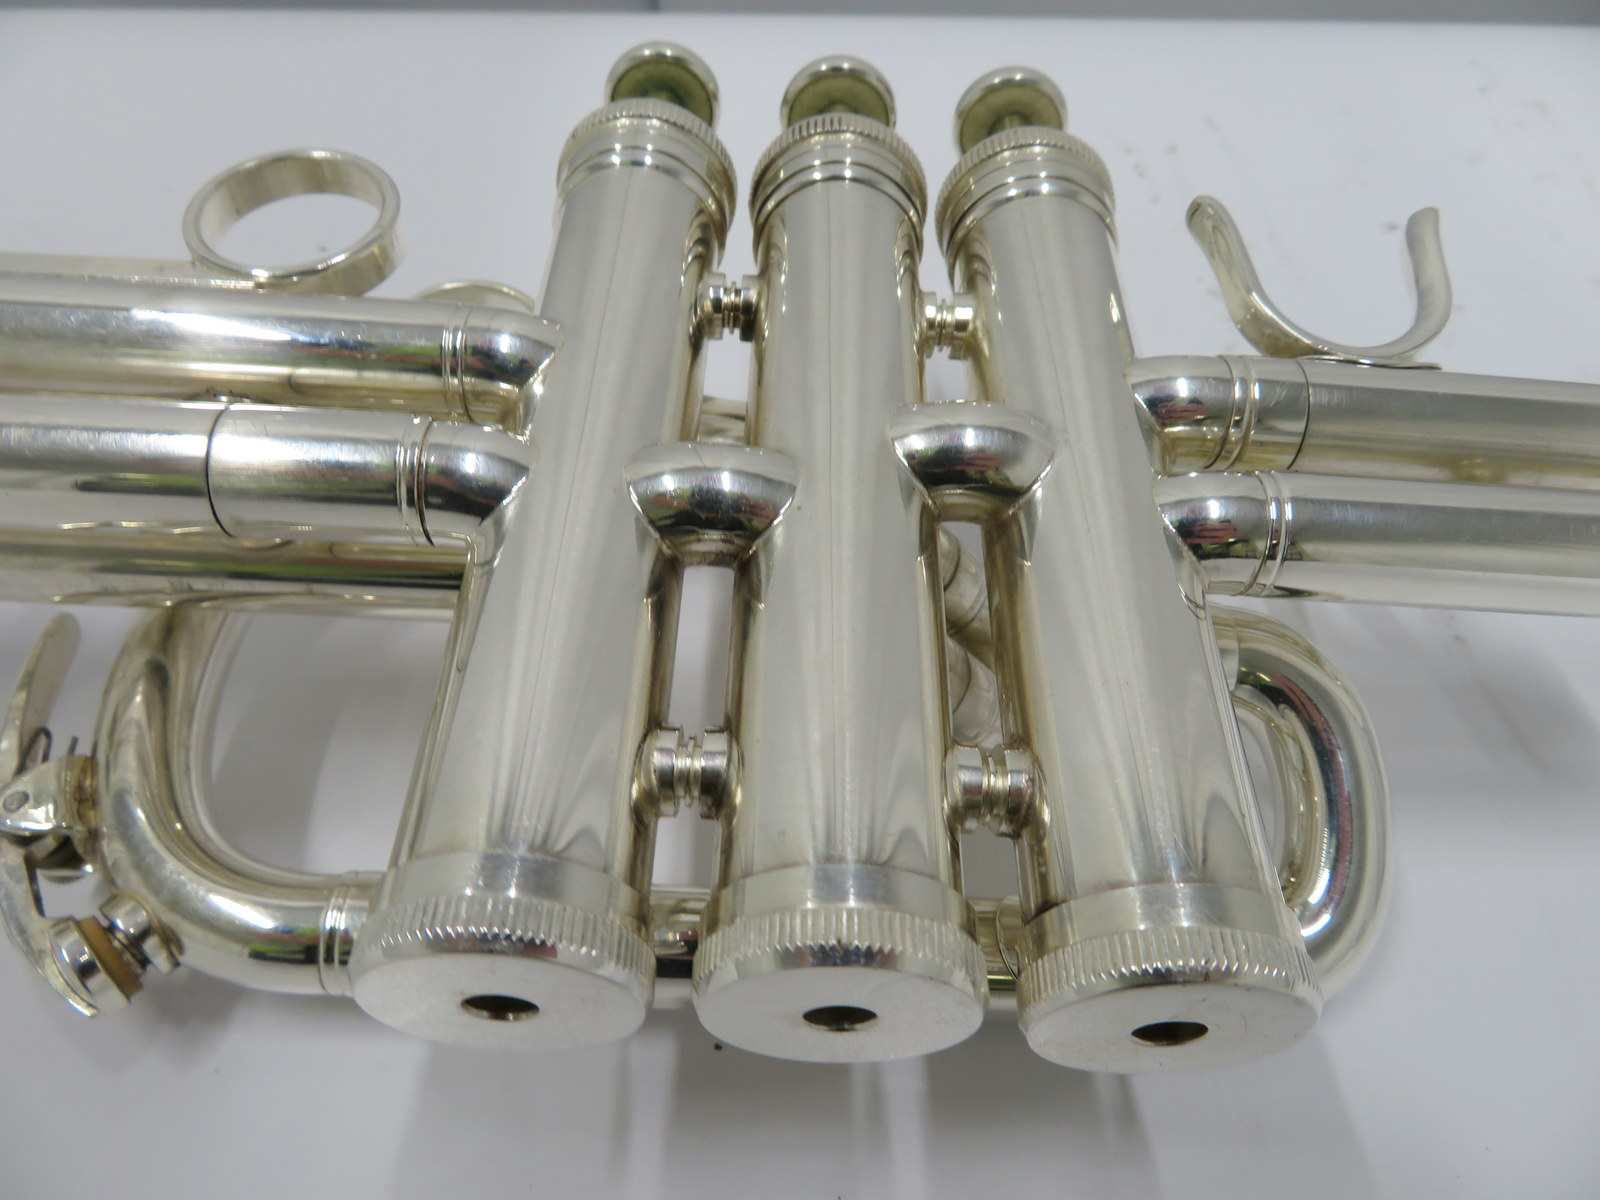 Besson BE706 International fanfare trumpet with case. Serial number: 885983. - Image 5 of 13